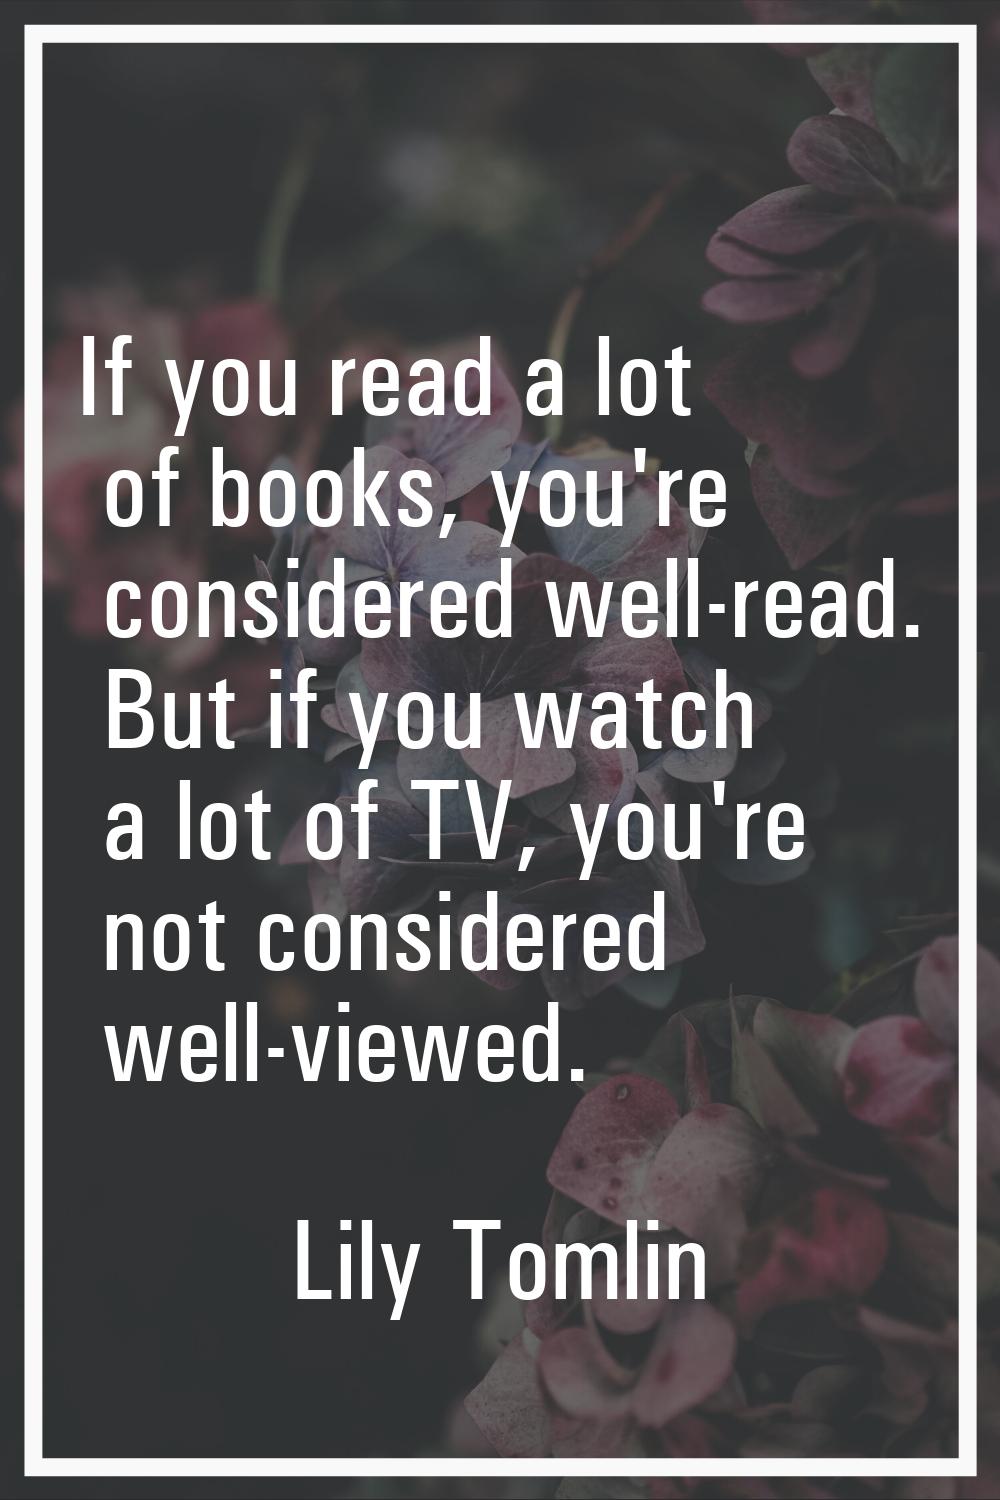 If you read a lot of books, you're considered well-read. But if you watch a lot of TV, you're not c